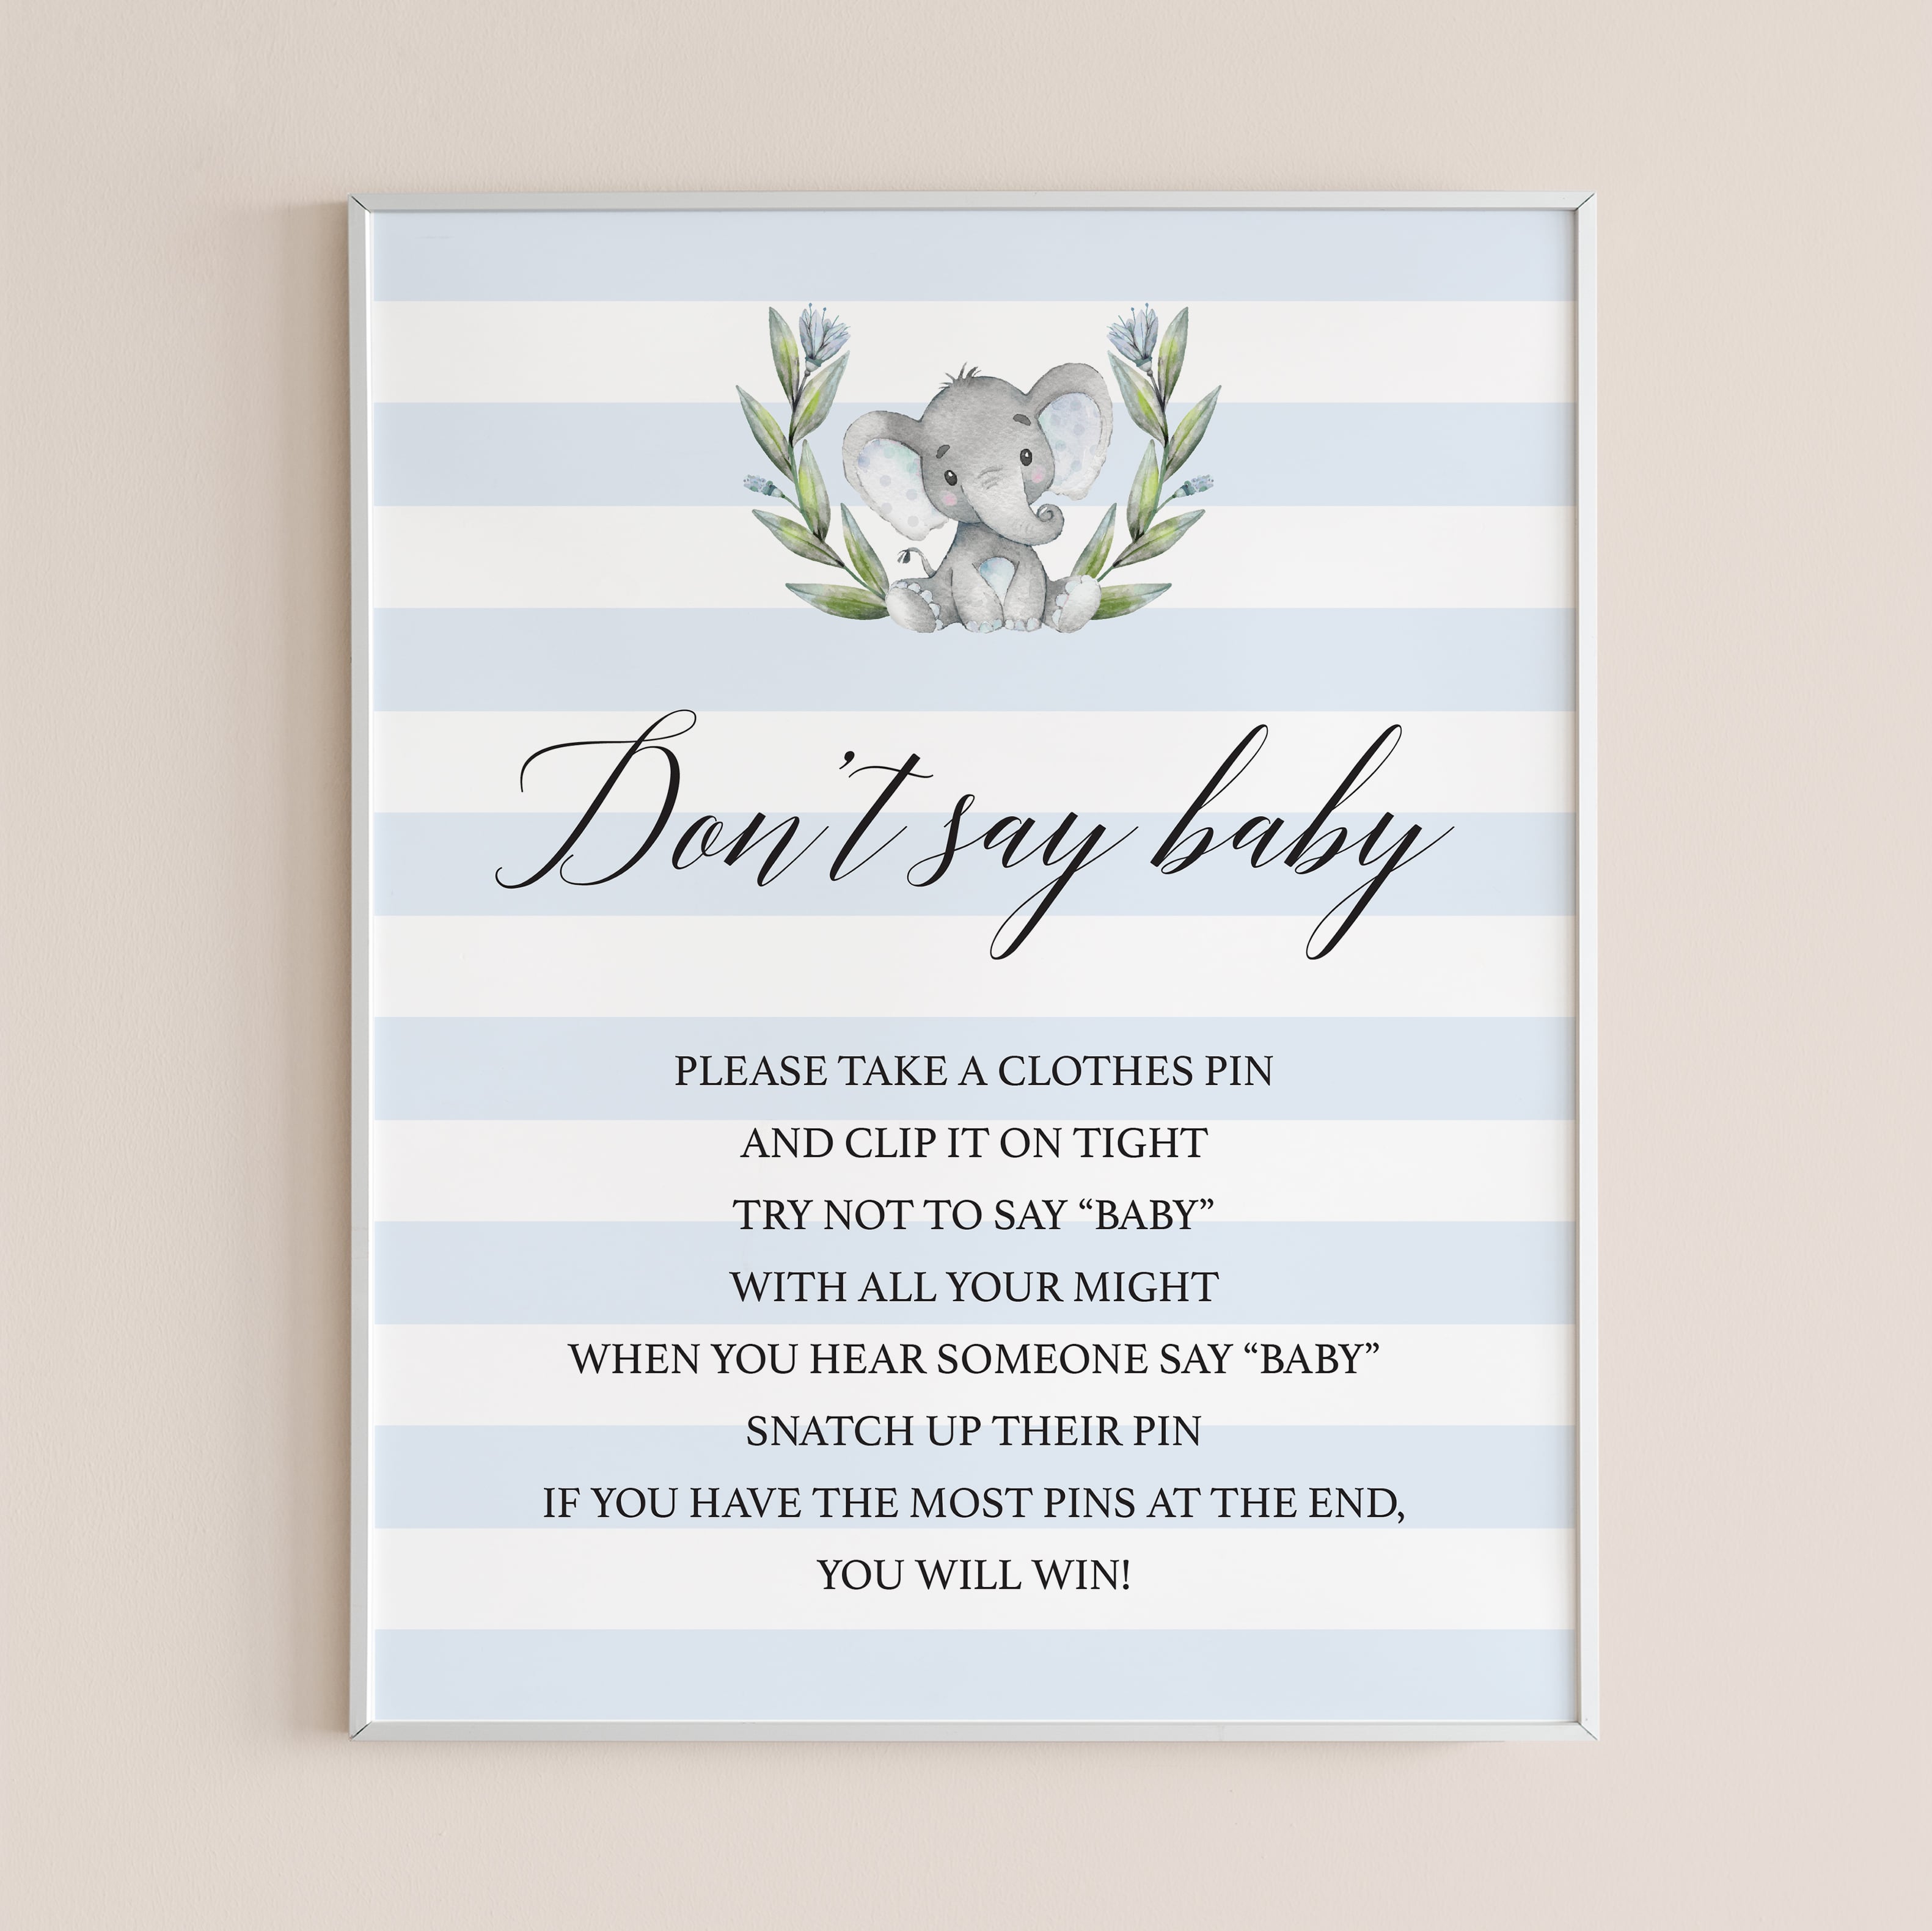 Don't say baby instant download baby shower game for boy by LittleSizzle